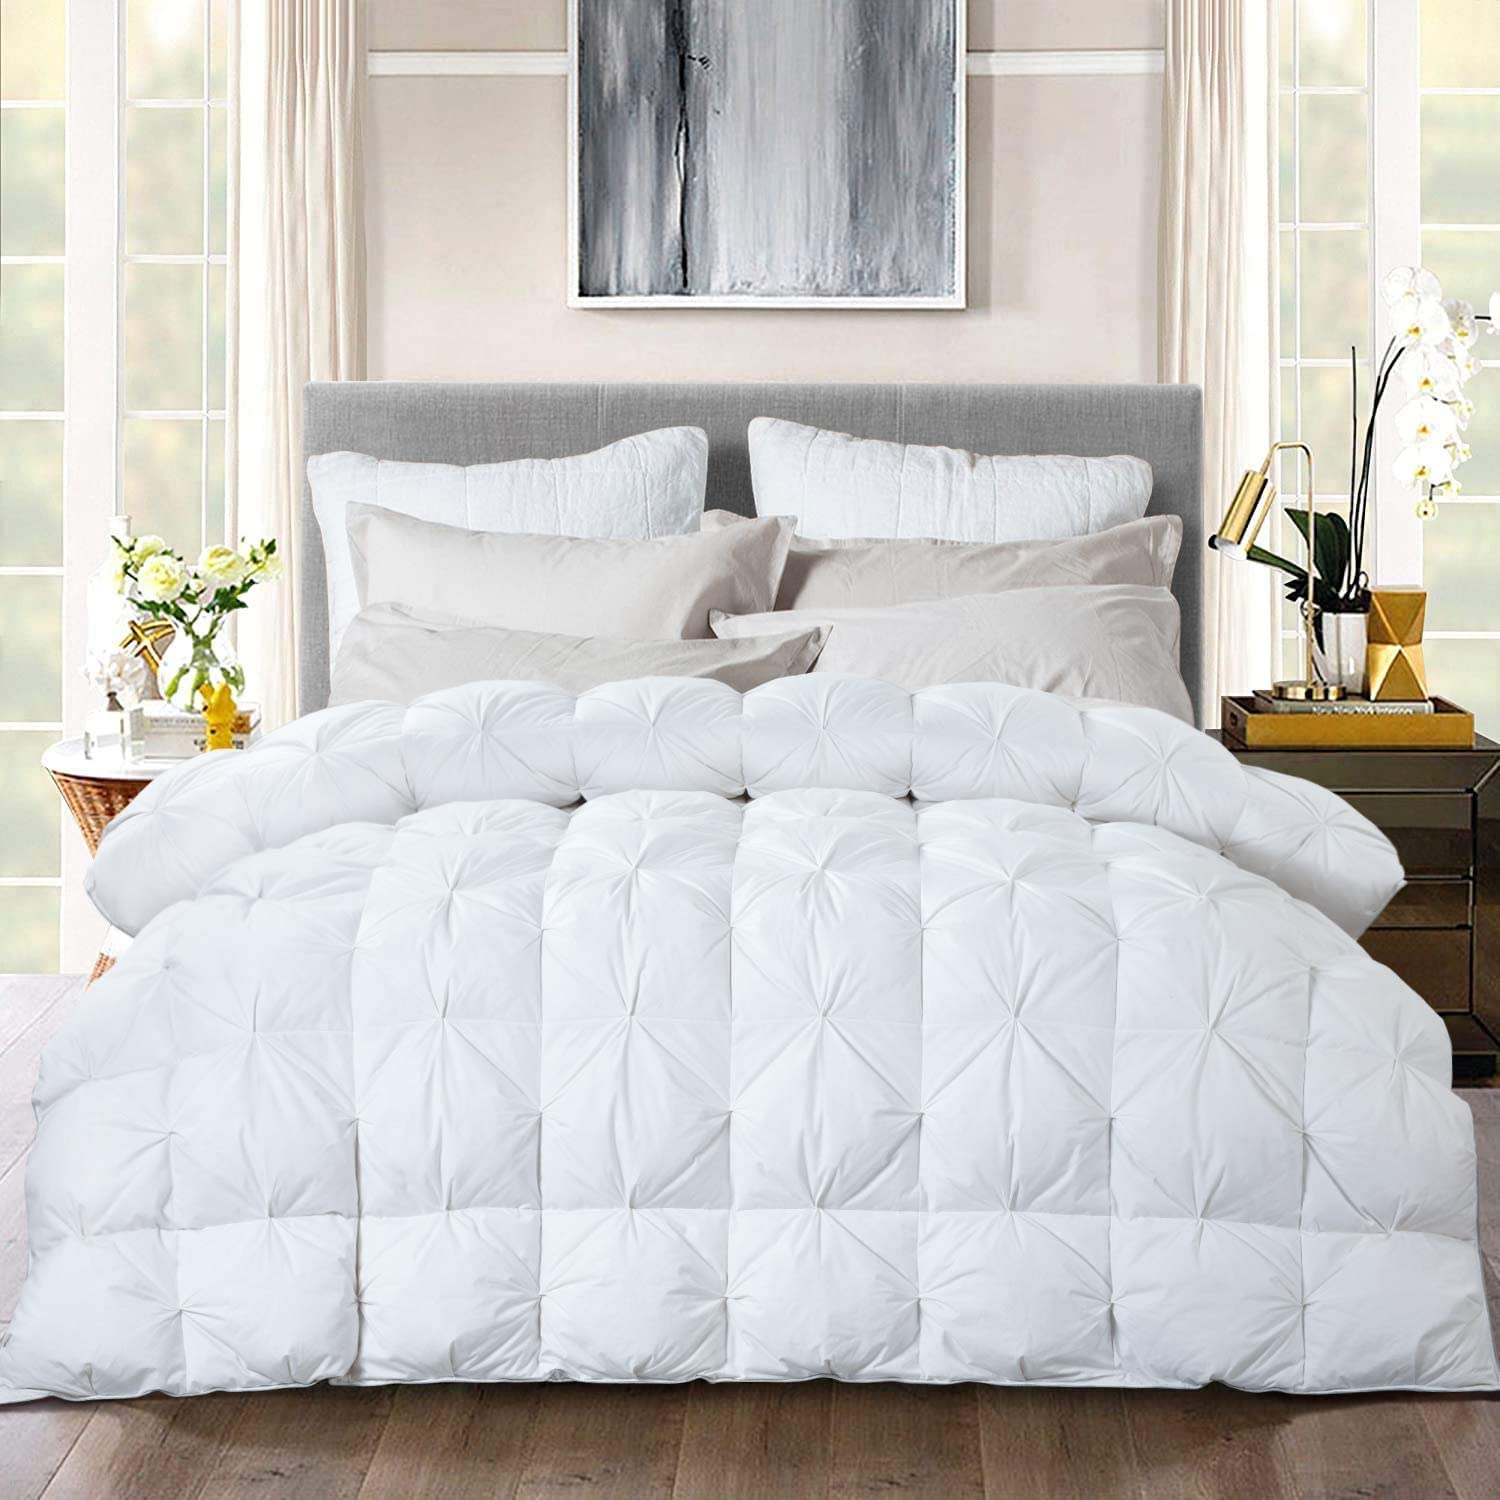 Luxurious 116 X108 Oversized King, Is A King Size Duvet Too Big For Double Bed